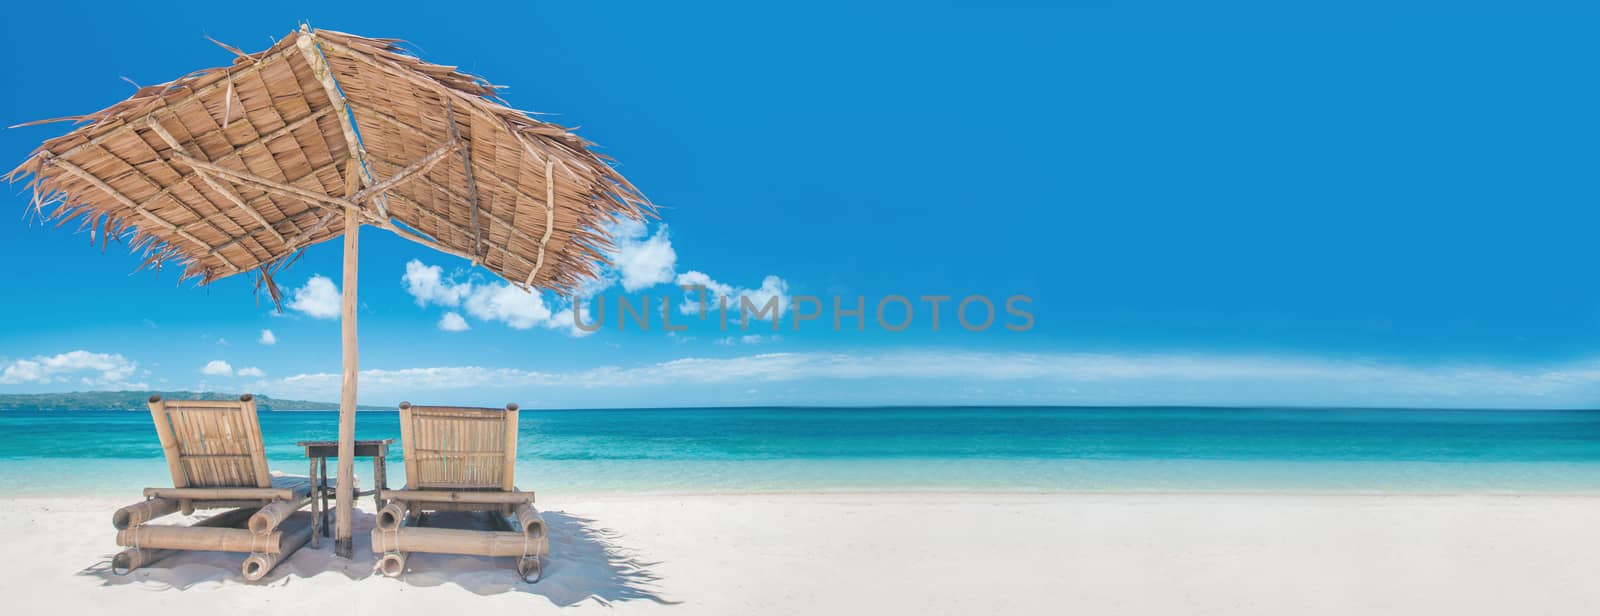 Two bamboo chairs under straw umbrella on tropical beach